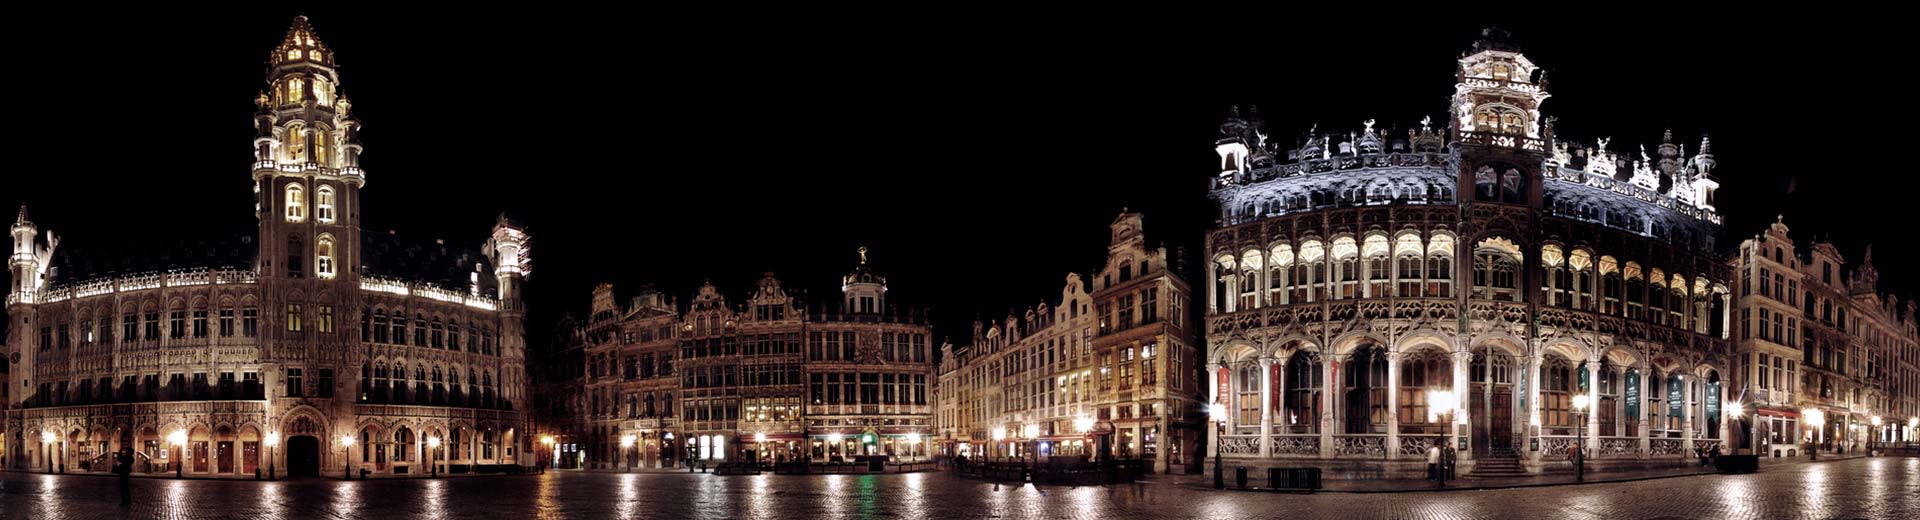 Brussels city center at night with the town hall in view.